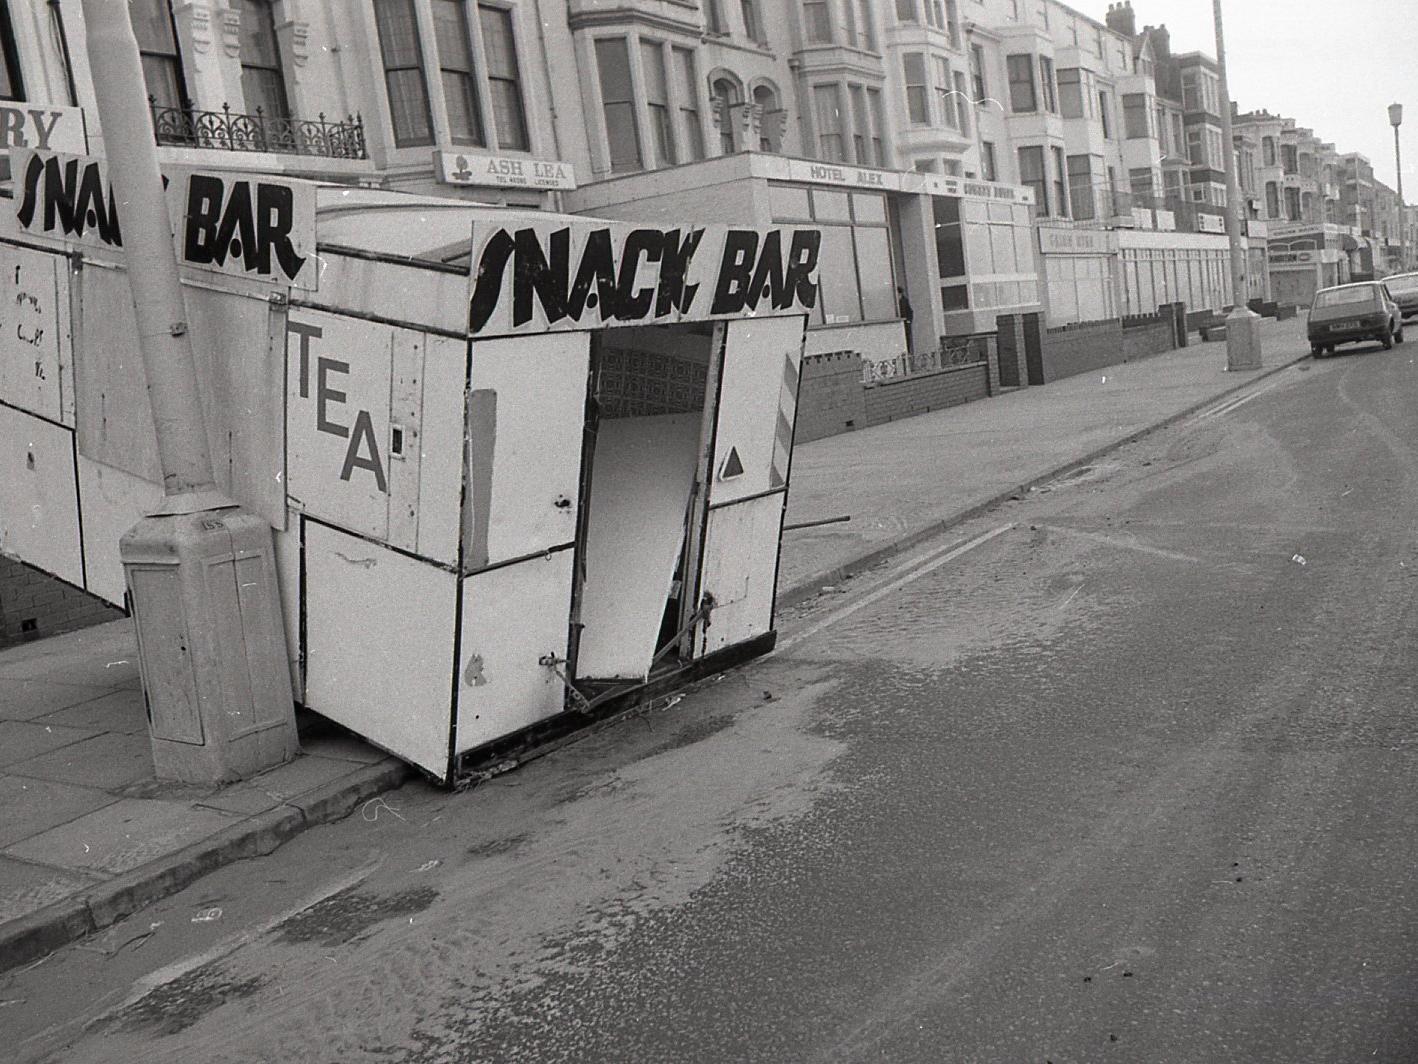 Damage to a snack bar after floods in Blackpool